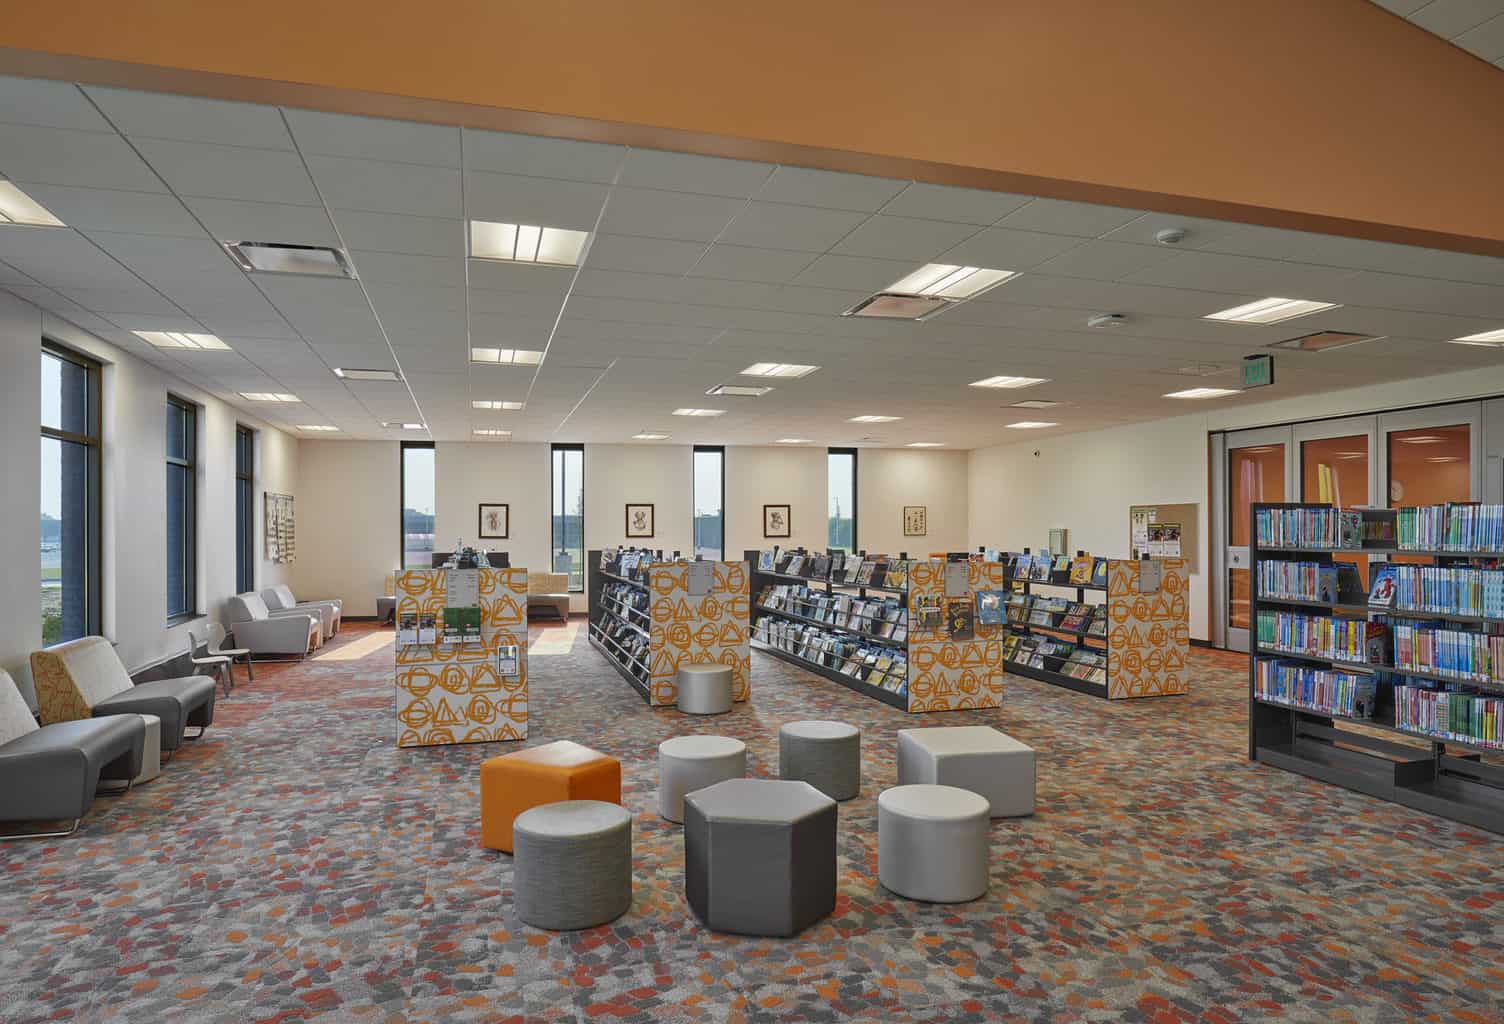 Inside the Eagle Branch library